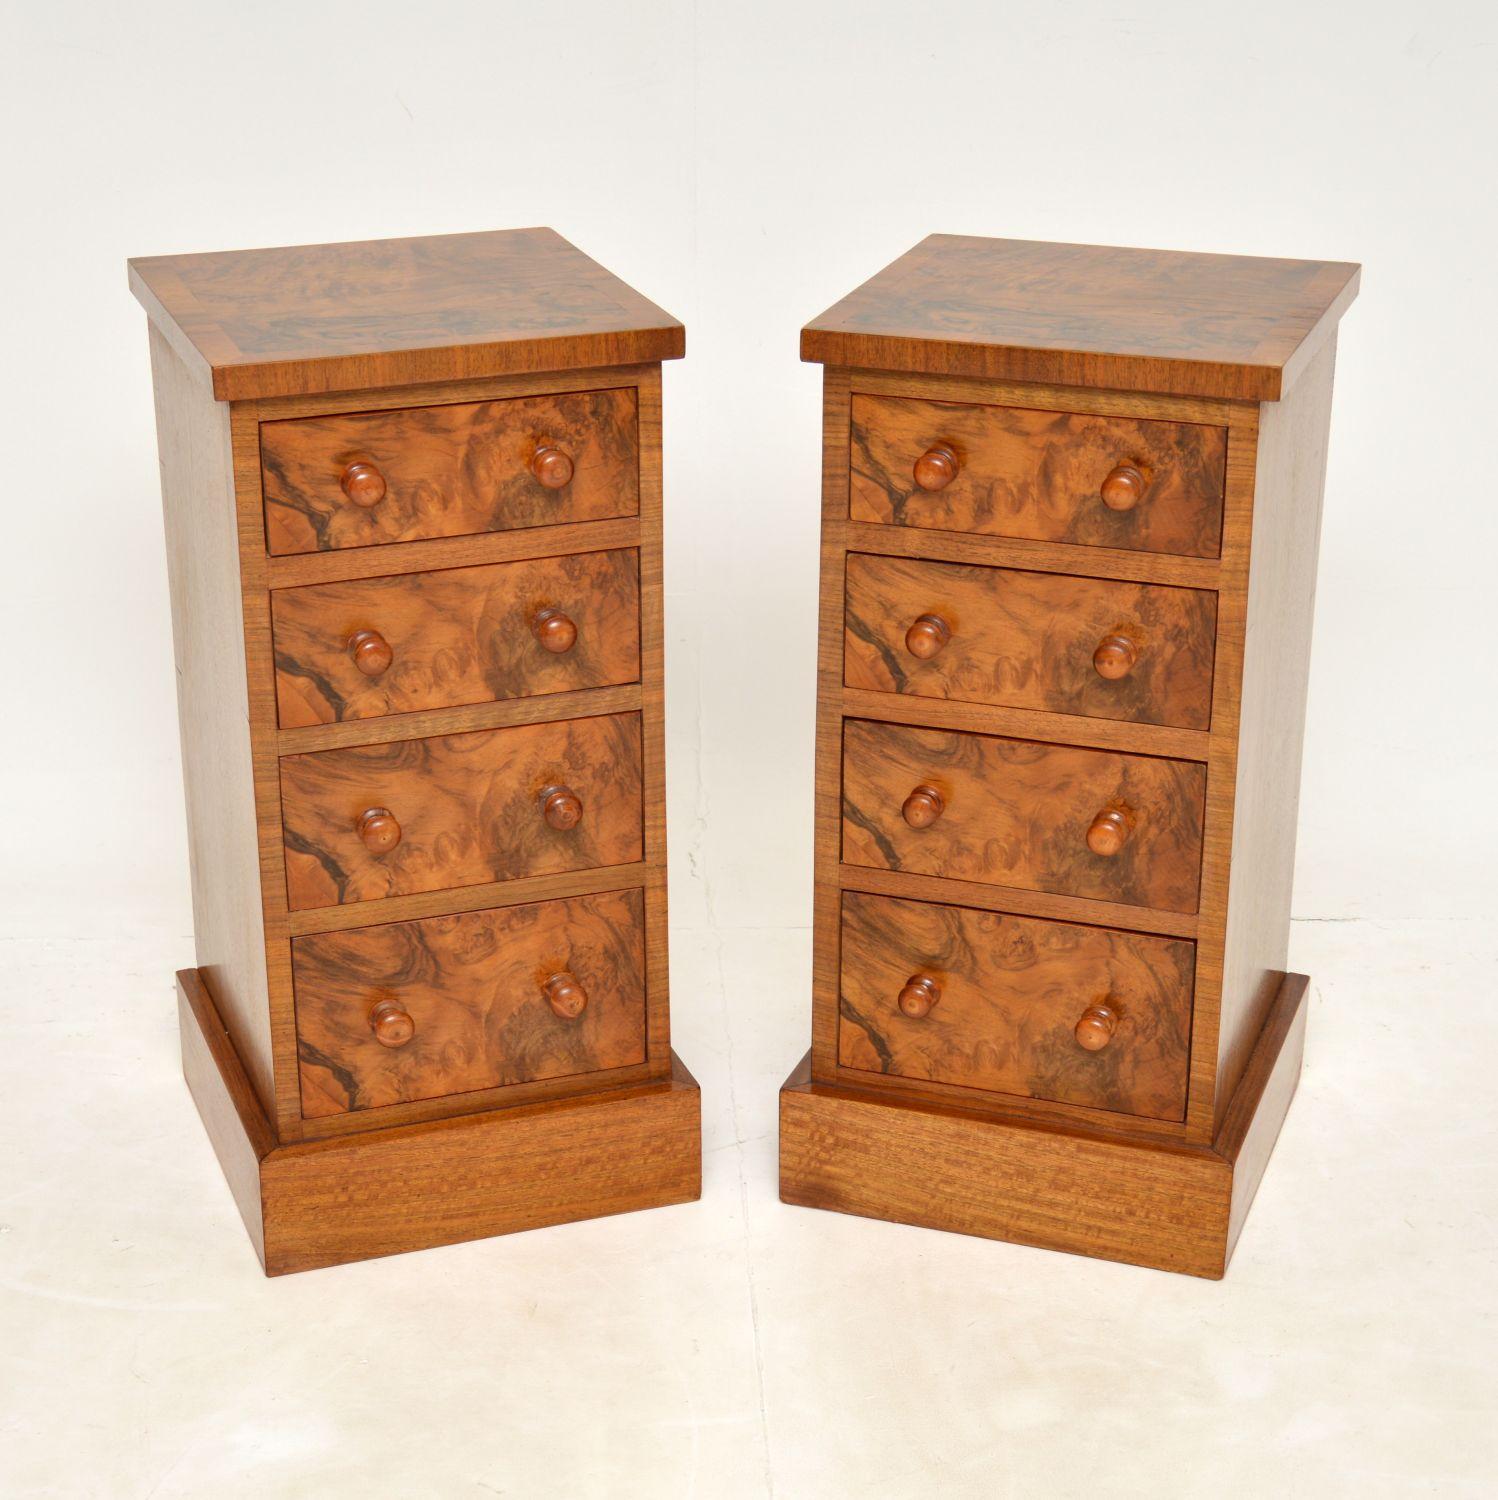 A beautiful and very useful pair of antique Victorian Style bedside chests, beautifully finished in burr walnut.

We have had them partially re-constructed from a parts of an antique dressing chest, they are a stunning burr walnut and they have